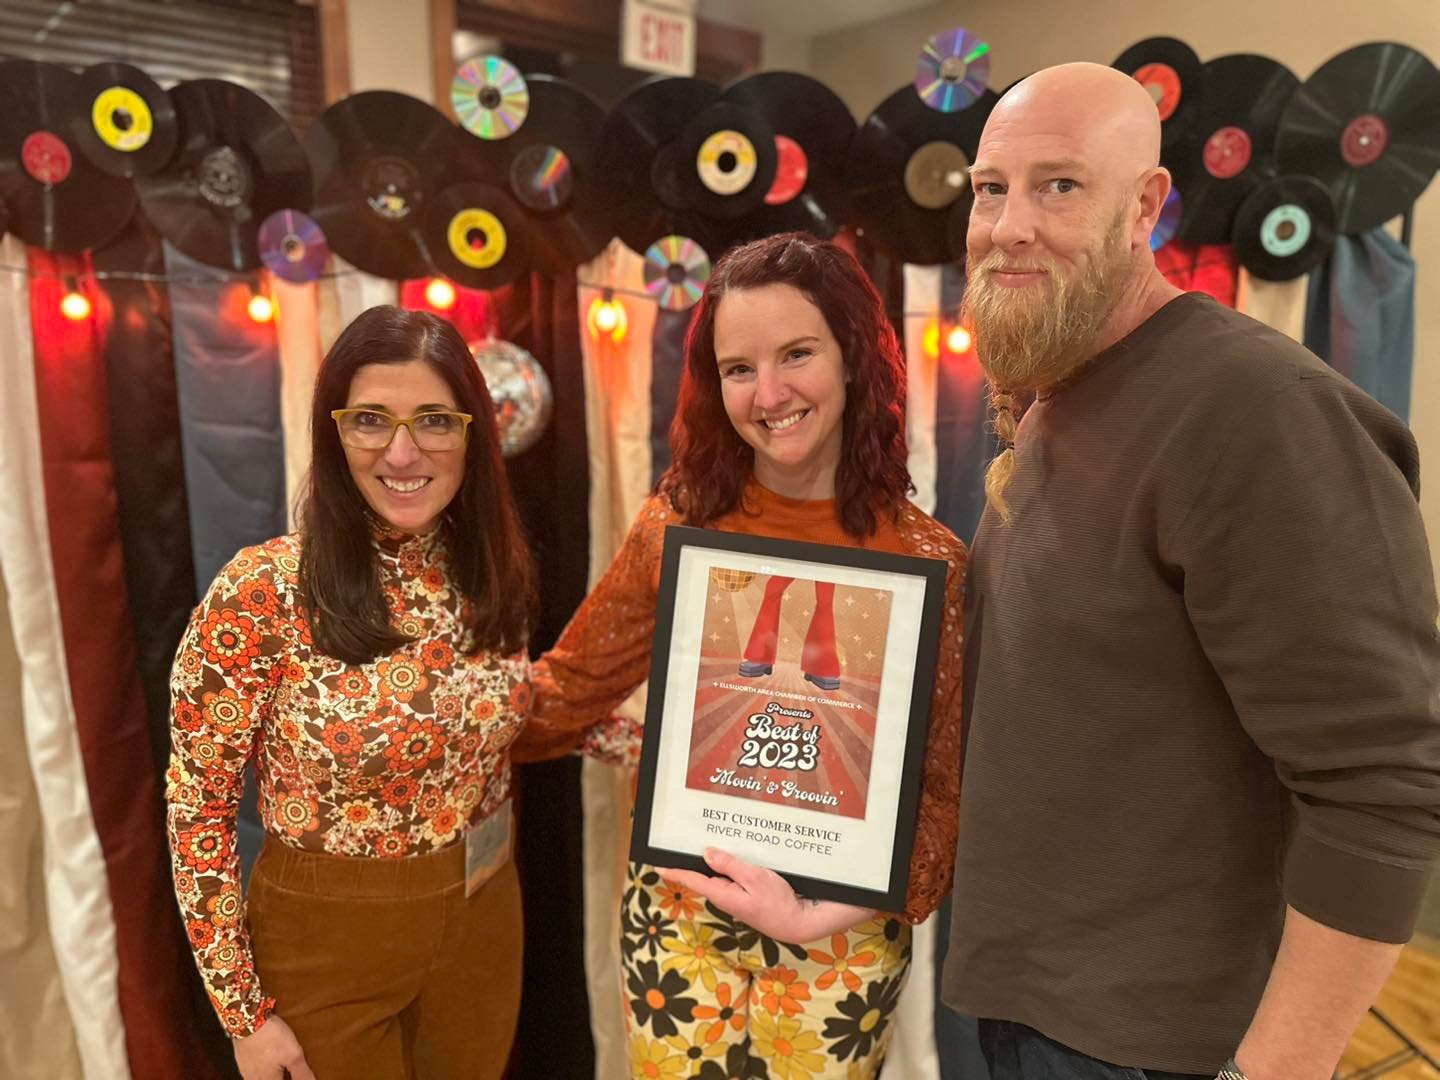 Chamber Board Director Dee Whipple (left) presented the Best Customer Service award to River Road Coffee’s Megan and David Gooselaw, their second win of the night